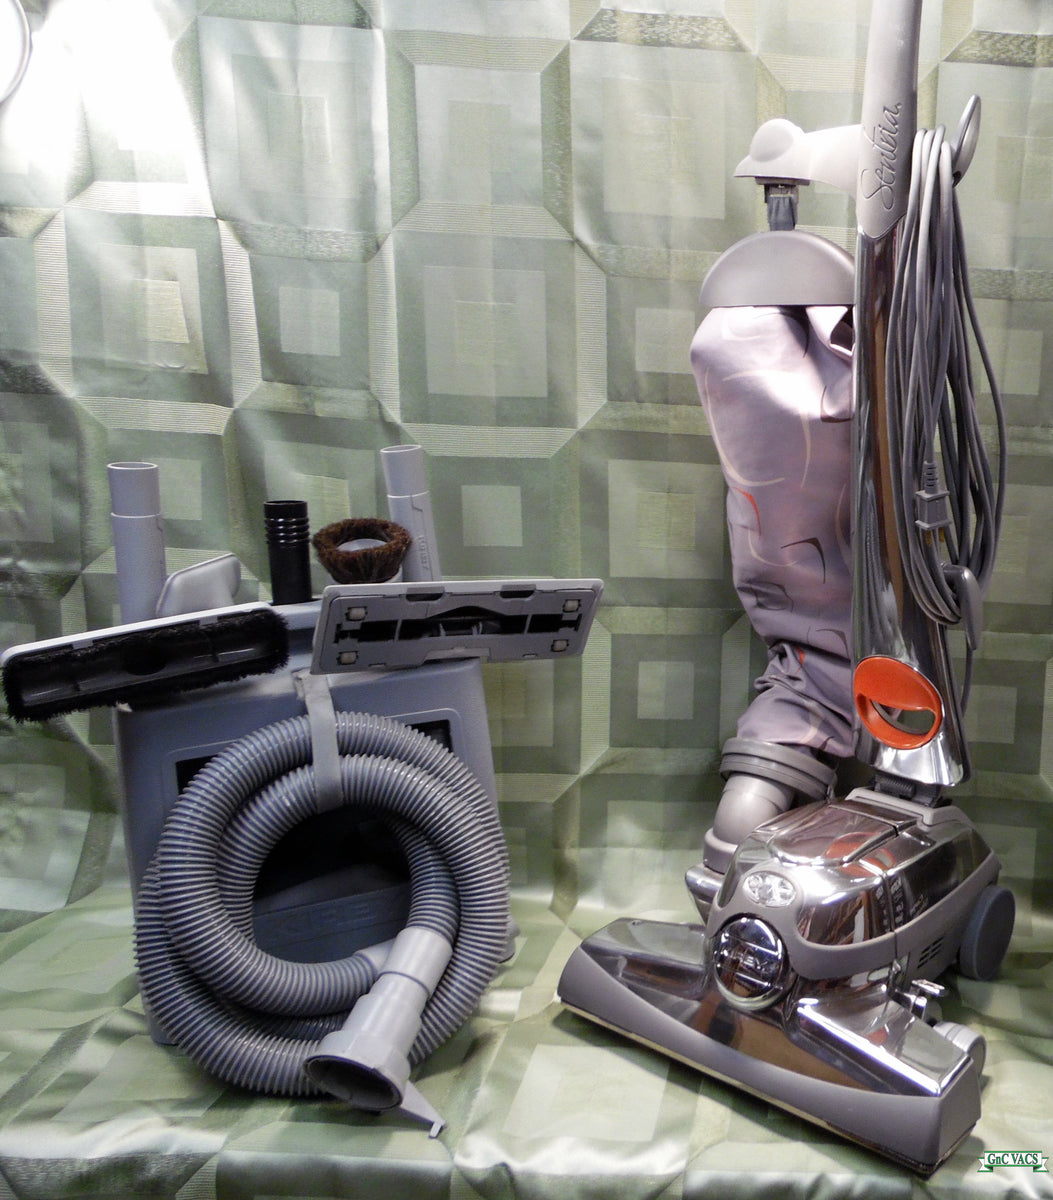  Kirby Avalir G10D Vacuum Cleaner with Tool Attachments,  Shampooer, Warranty